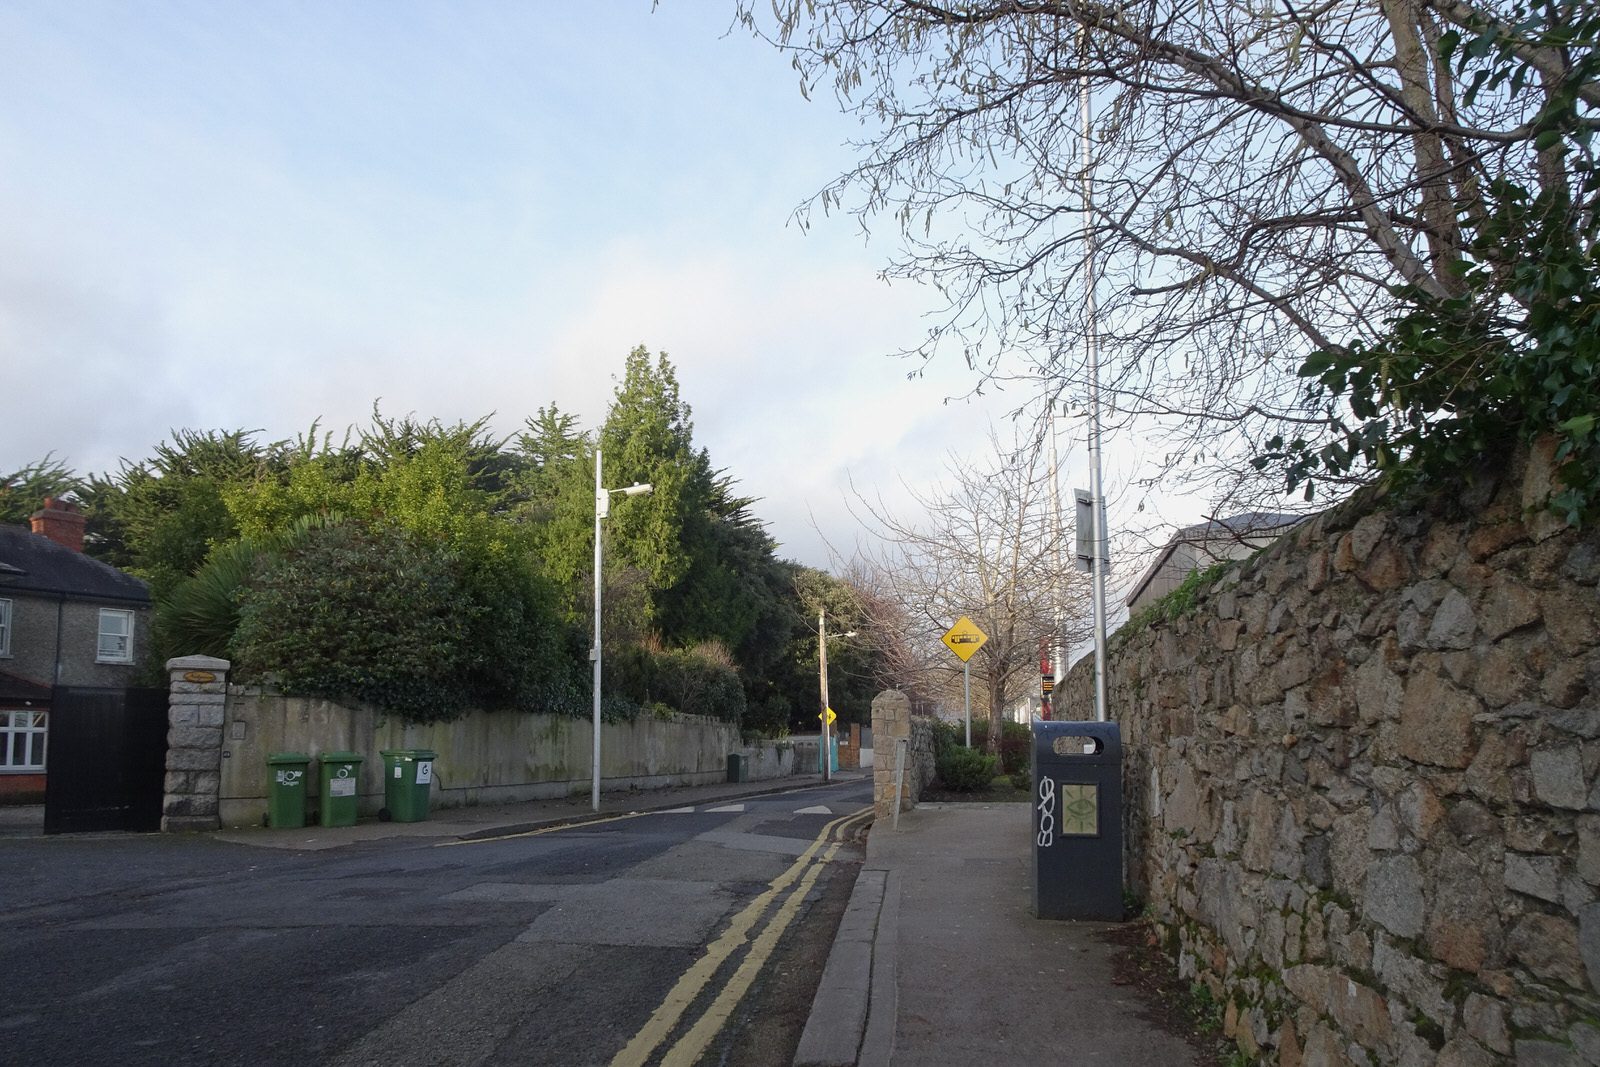 THE MILLTOWN LUAS TRAM STOP A FEW DAYS BEFORE CHRISTMAS DAY [AND NEARBY]-226258-1